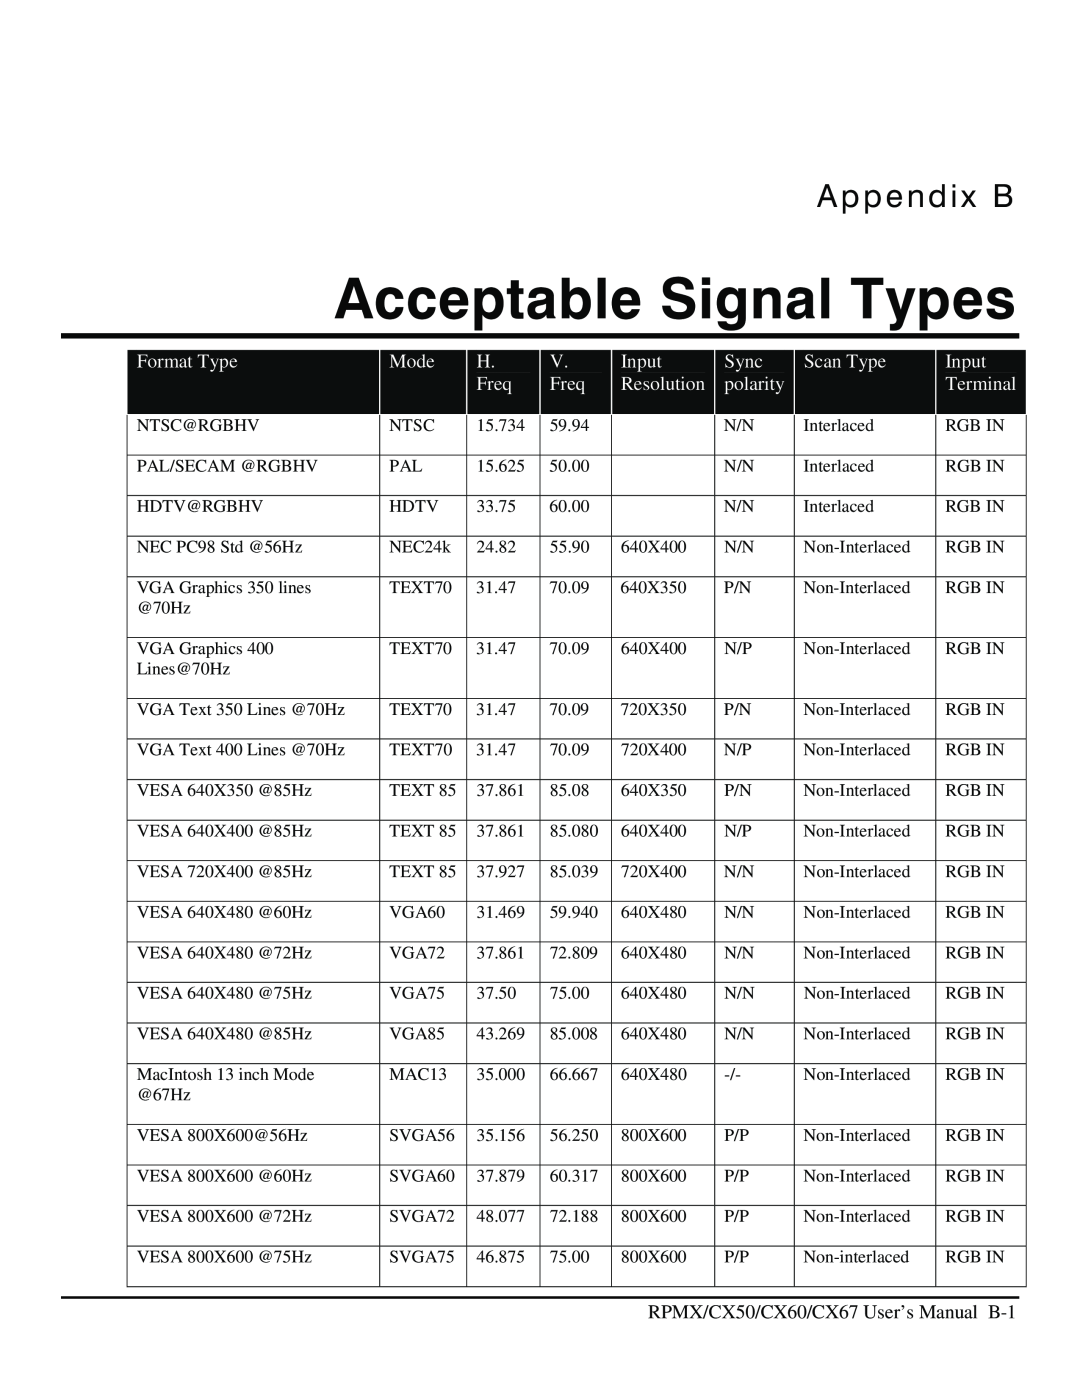 Christie Digital Systems CX60, CX50 Acceptable Signal Types, Appendix B, Format Type, Mode, Input, Sync, Scan Type, Freq 